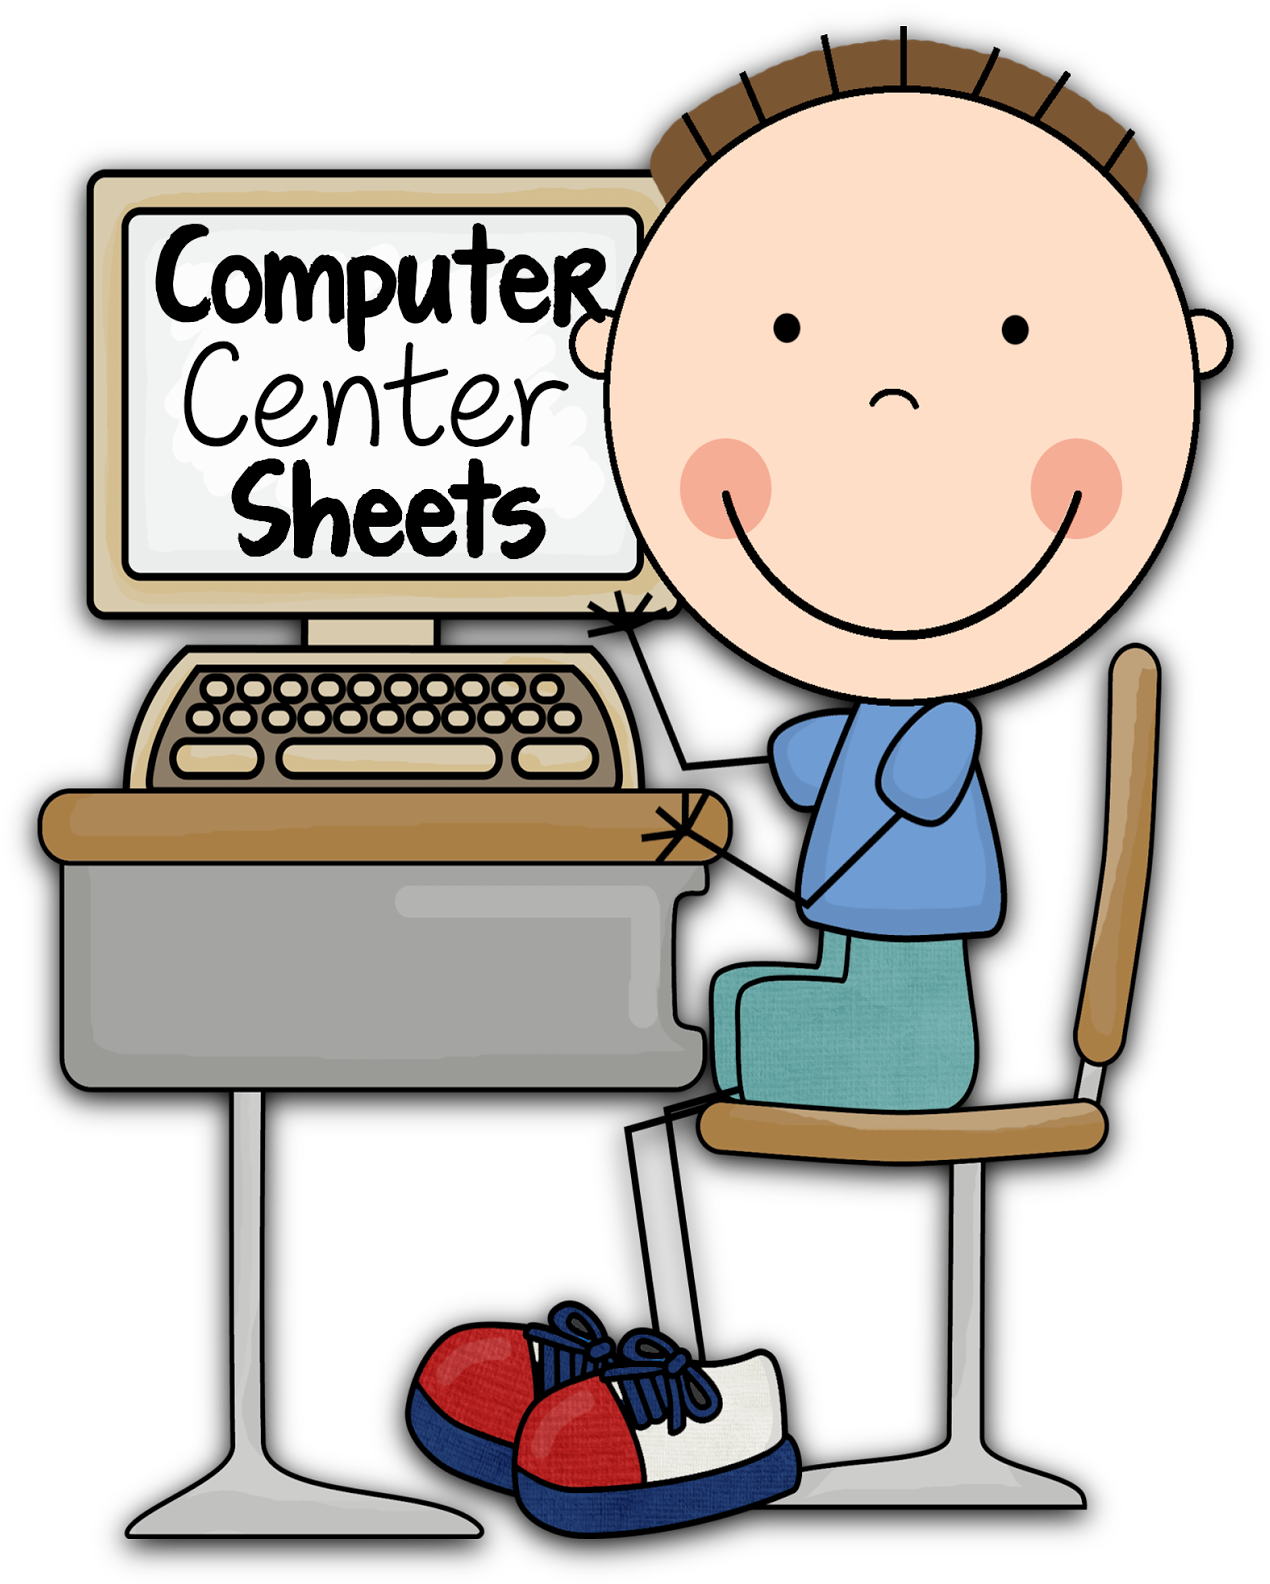 Incorporate Technology Into Math Workshop Easily - Computer In A School Clip Art (1283x1600)